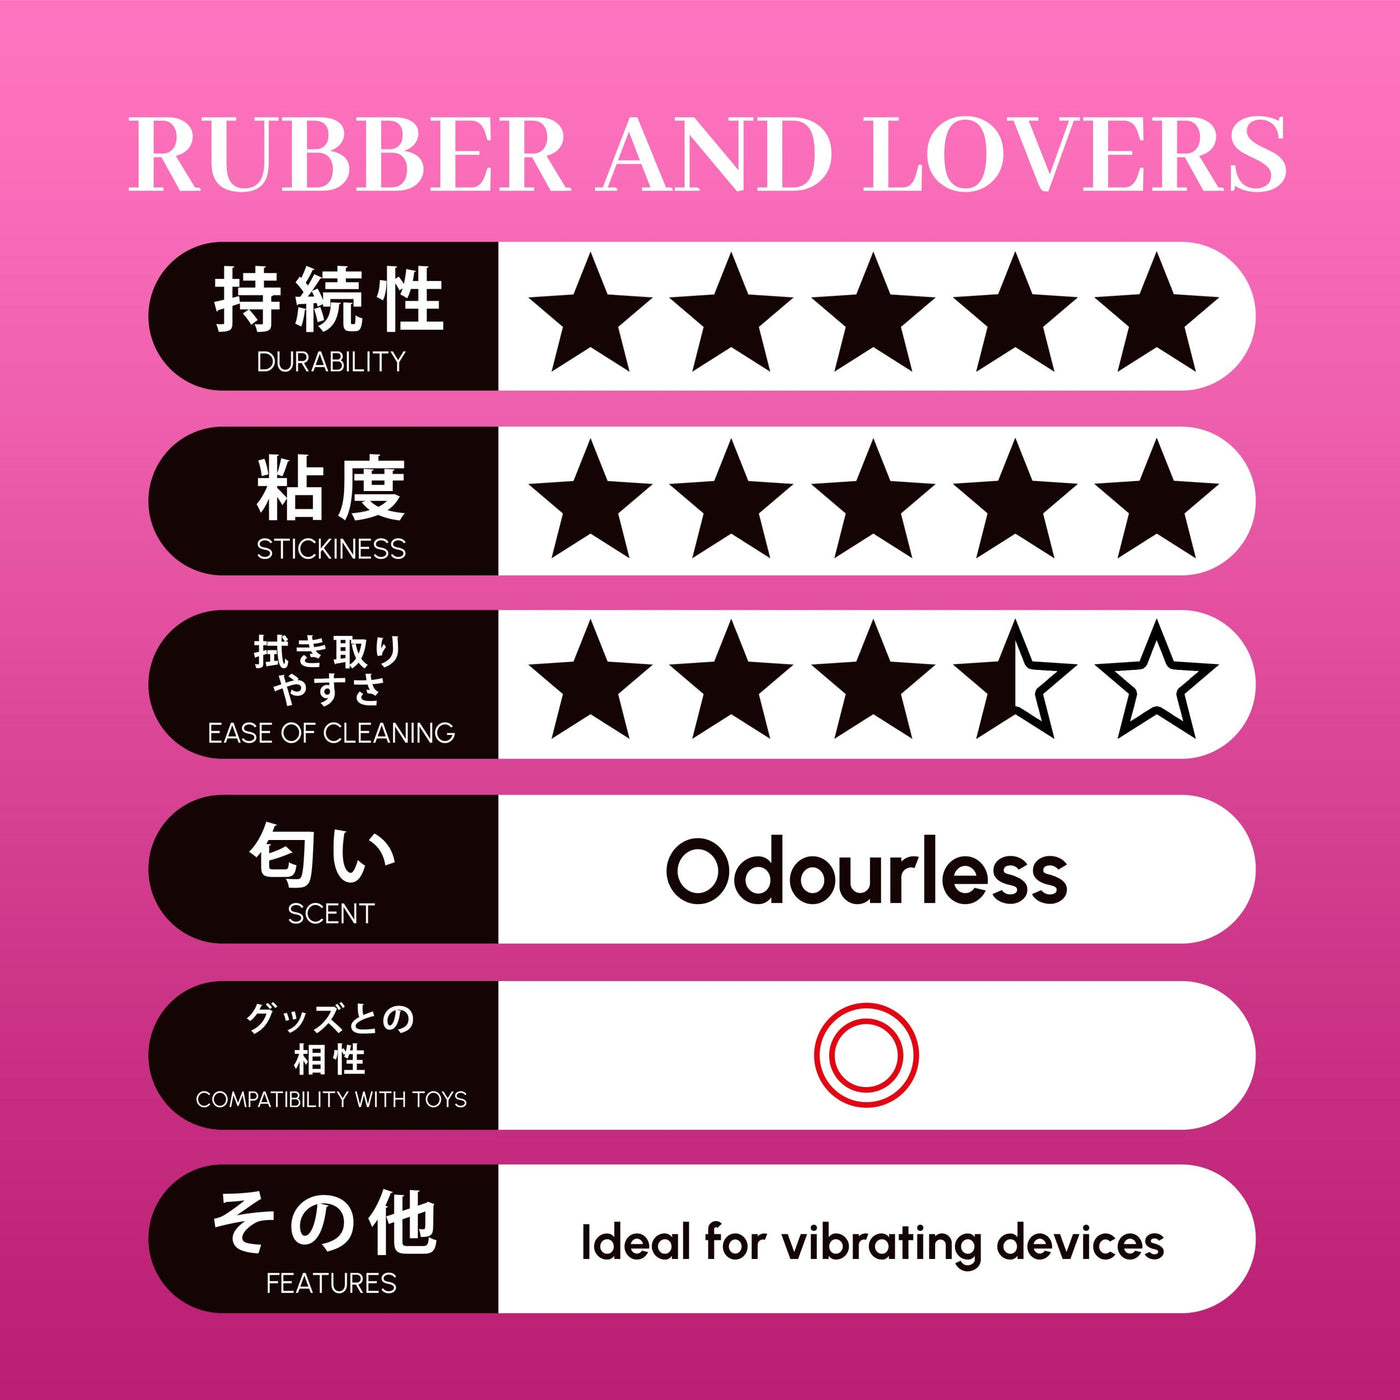 Pepee Rubber and Lovers